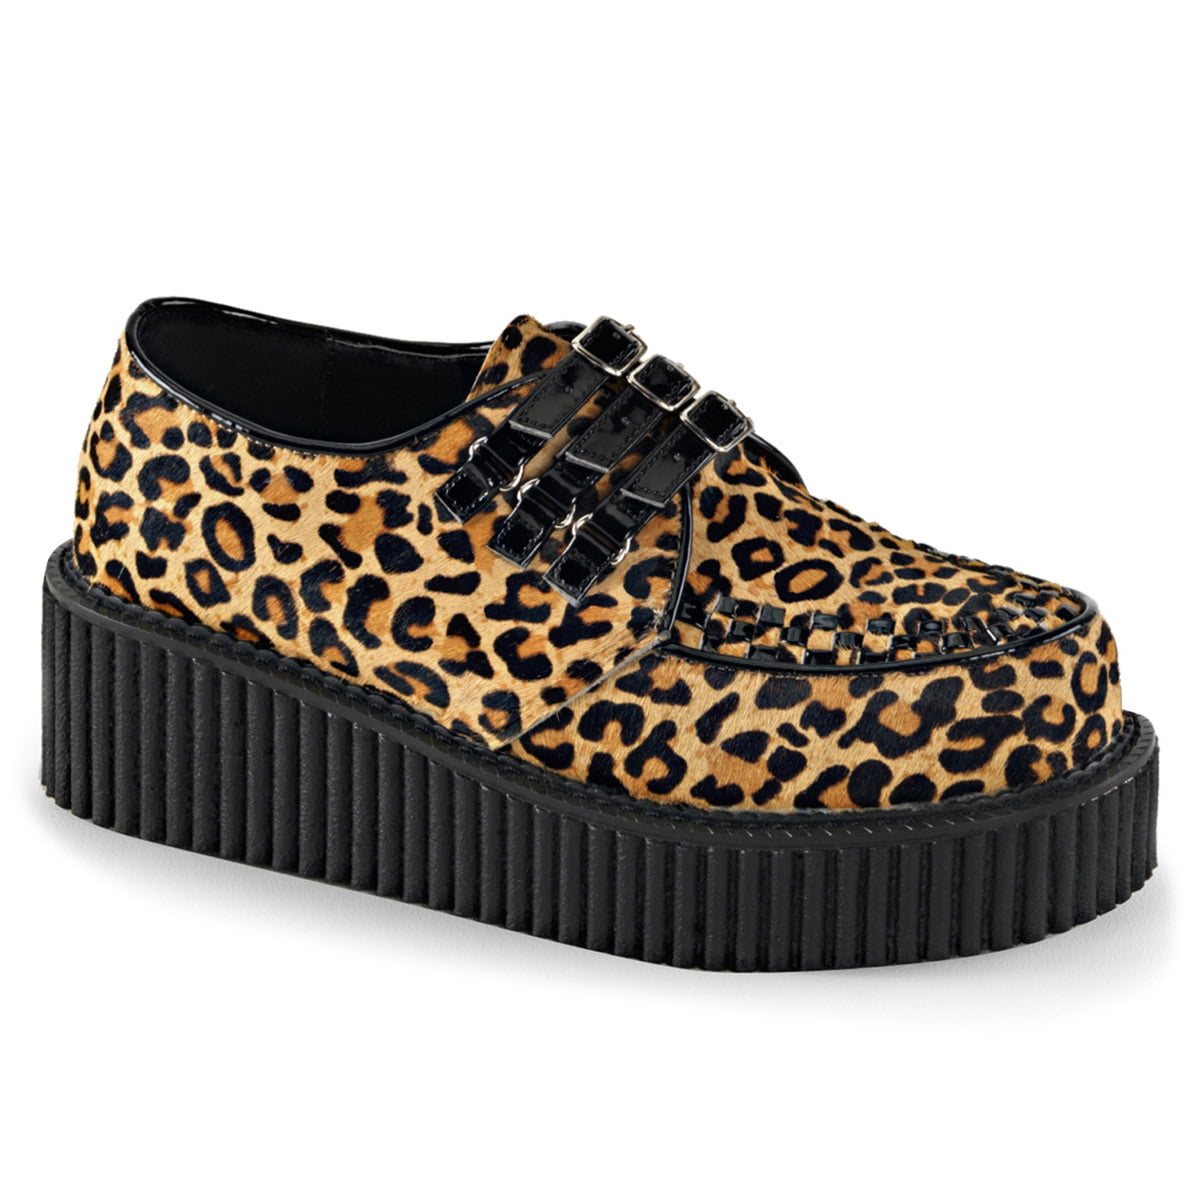 leopard print creepers shoes